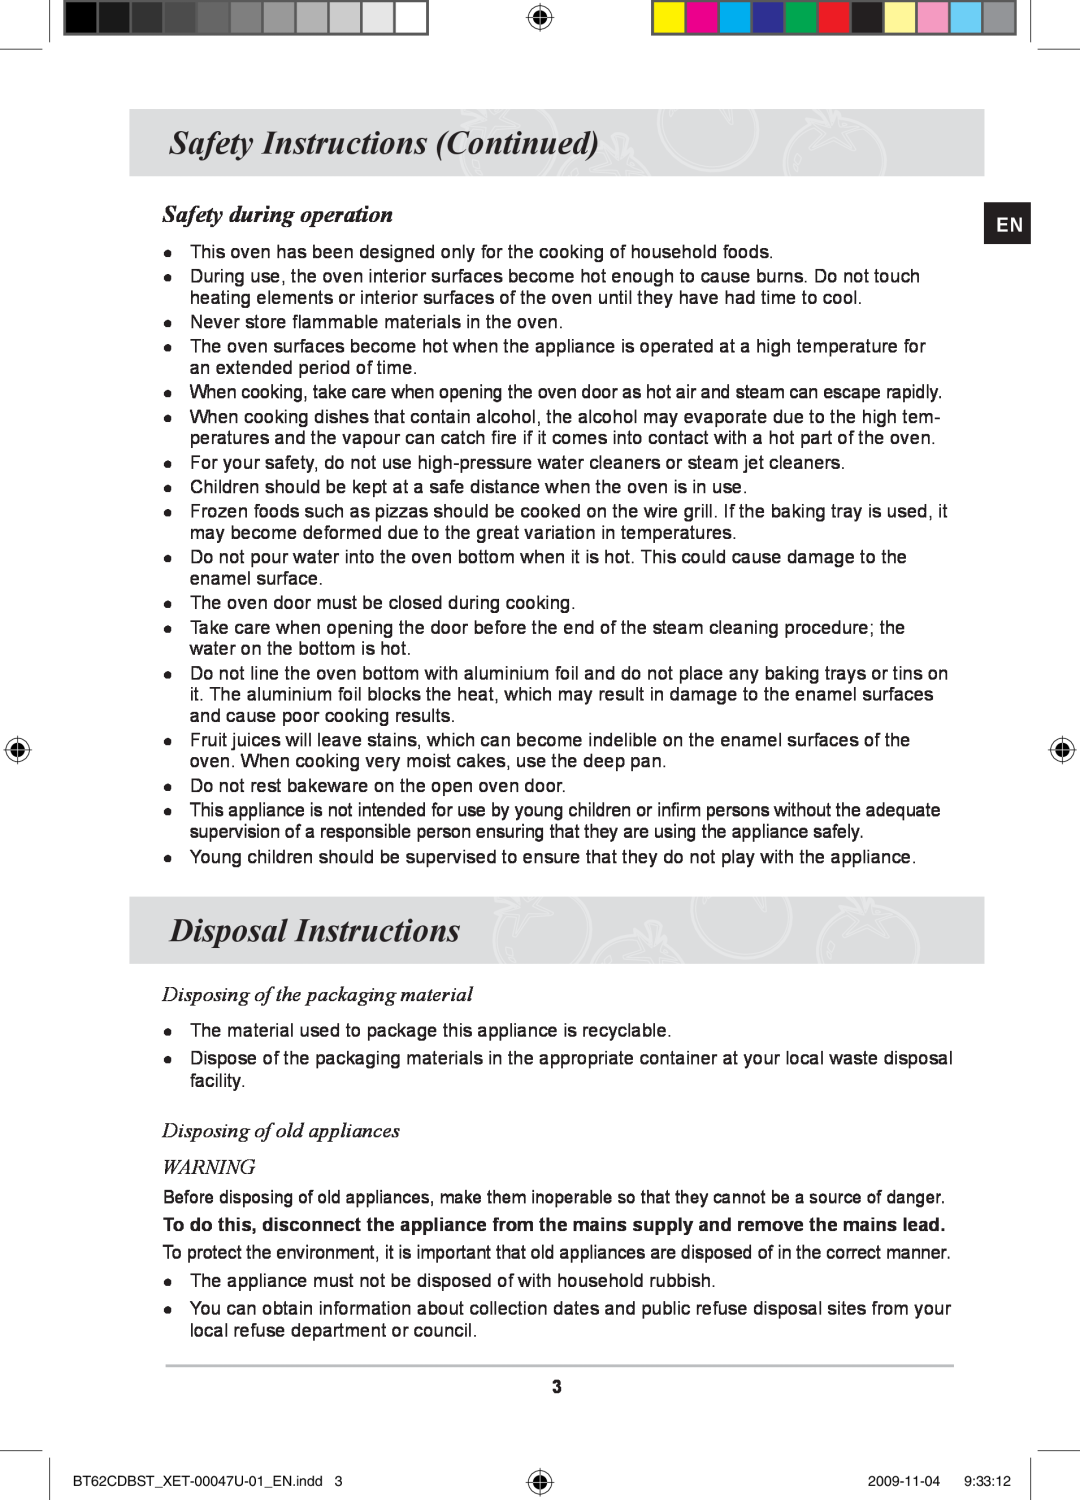 Samsung BT62CDBST/XET manual Safety Instructions Continued, Disposal Instructions, Safety during operation 